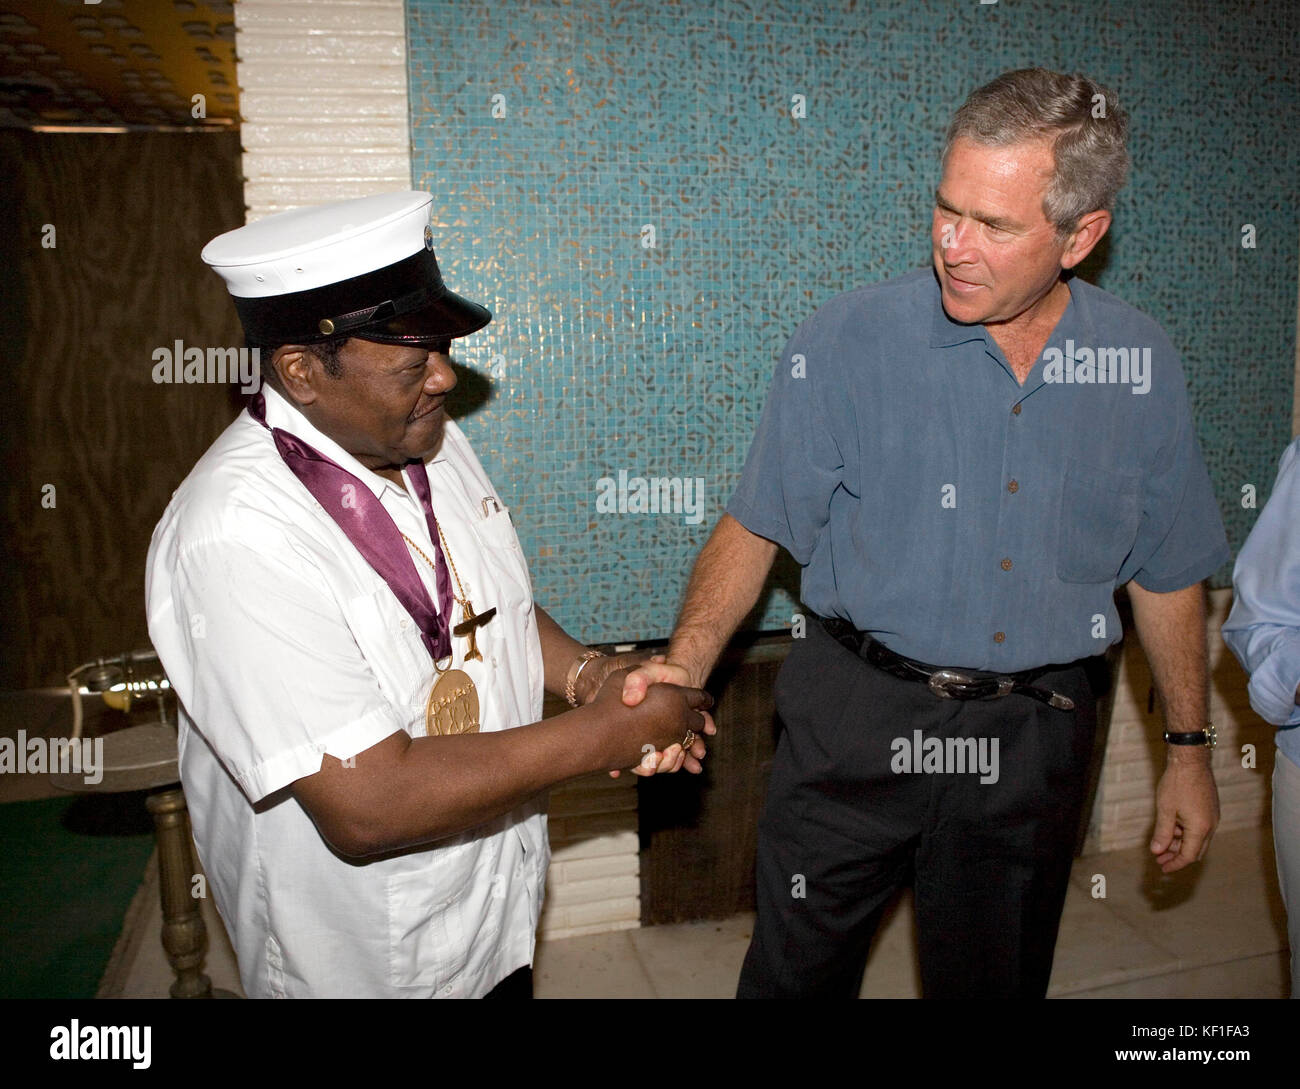 United States President George W. Bush shakes the hand of the legendary Fats Domino, wearing a National Medal of Arts, after the President presented it Tuesday, August 29, 2006, at the musician's home in the Lower 9th Ward of New Orleans. The medal was a replacement medal for the one -- originally awarded by President Bill Clinton -- that was lost in the flood waters of Hurricane Katrina. Mandatory Credit: Eric Draper/White House via CNP/MediaPunch Stock Photo